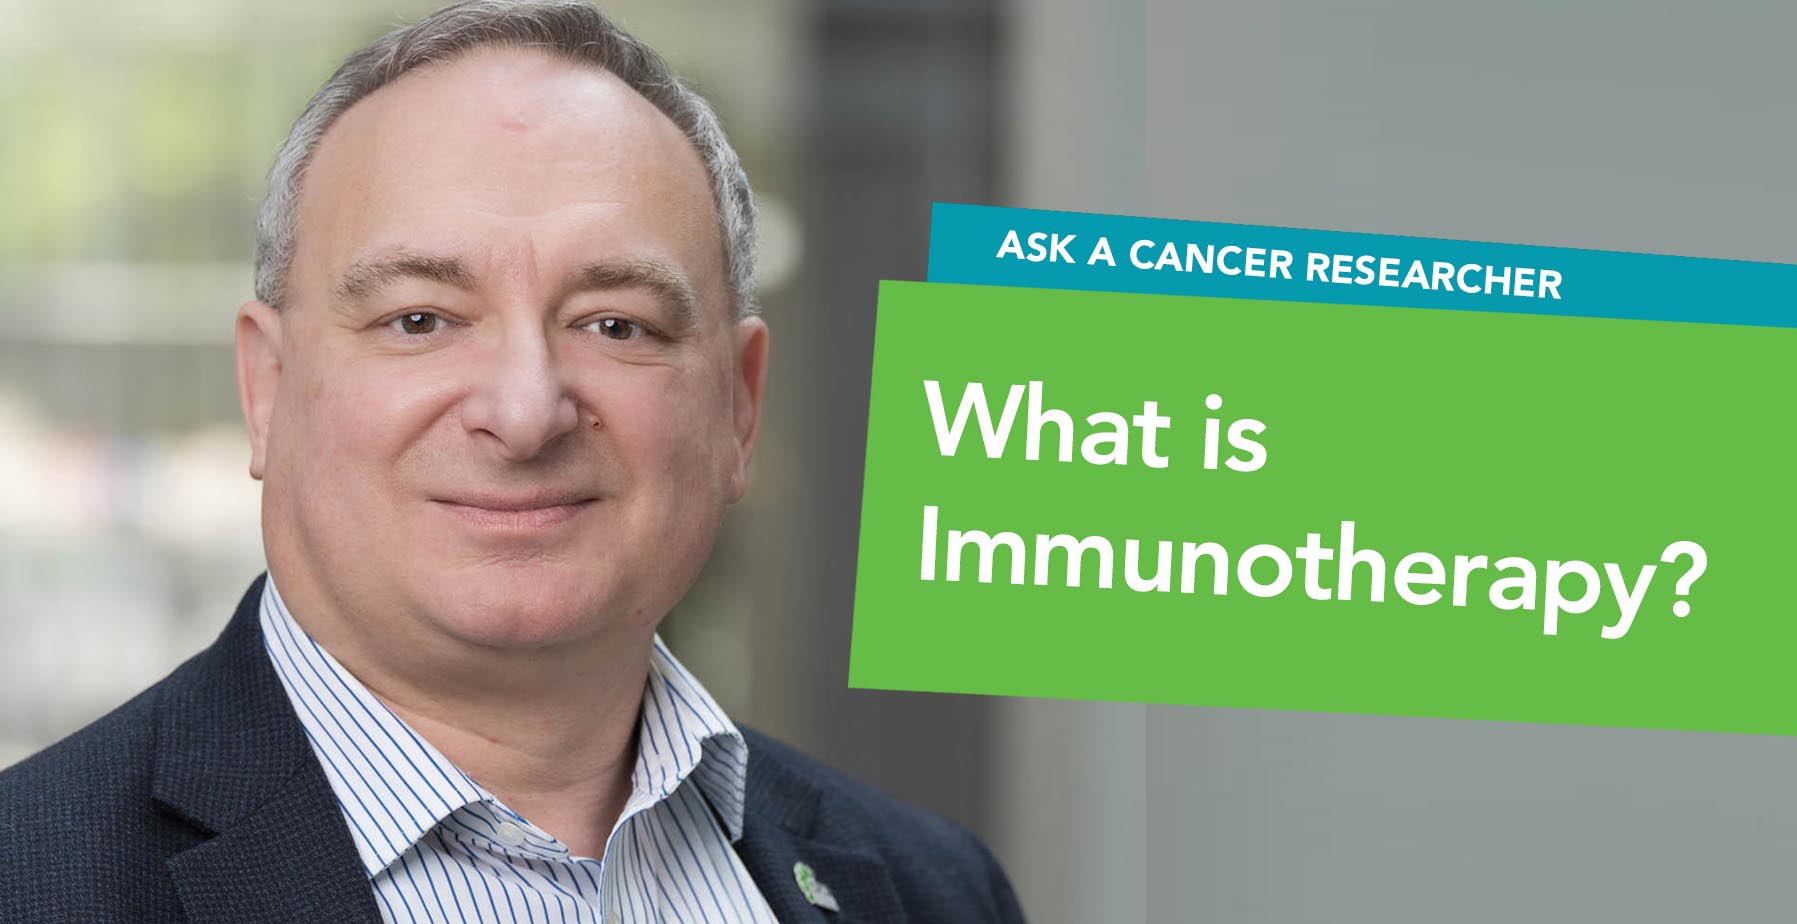 Ask a Cancer Researcher: What is immunotherapy?